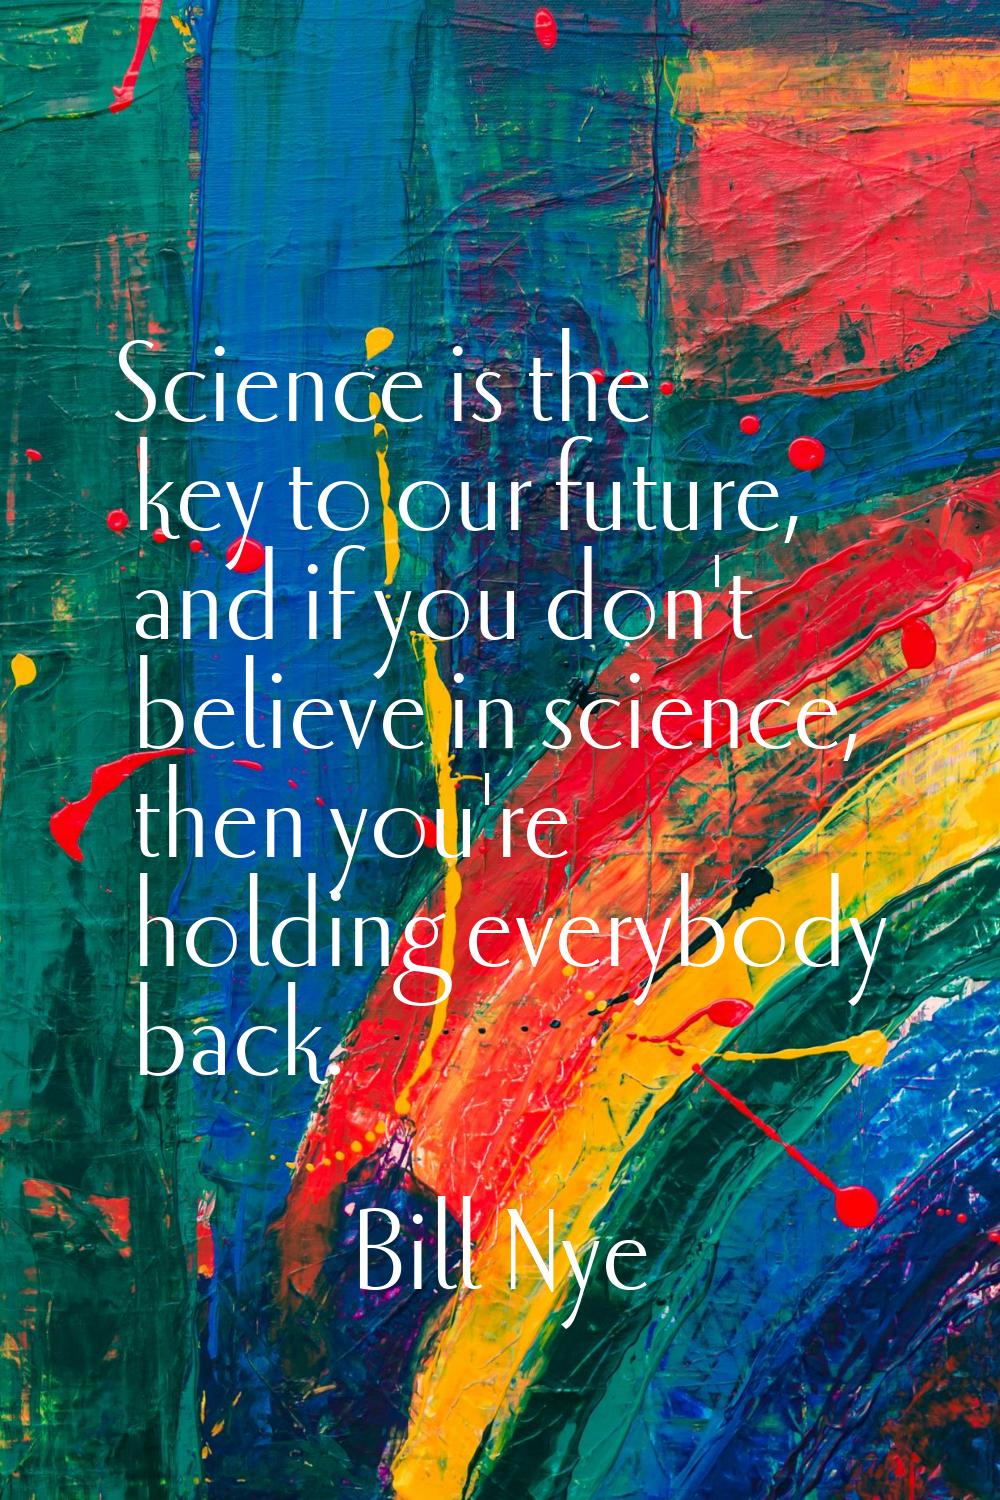 Science is the key to our future, and if you don't believe in science, then you're holding everybod